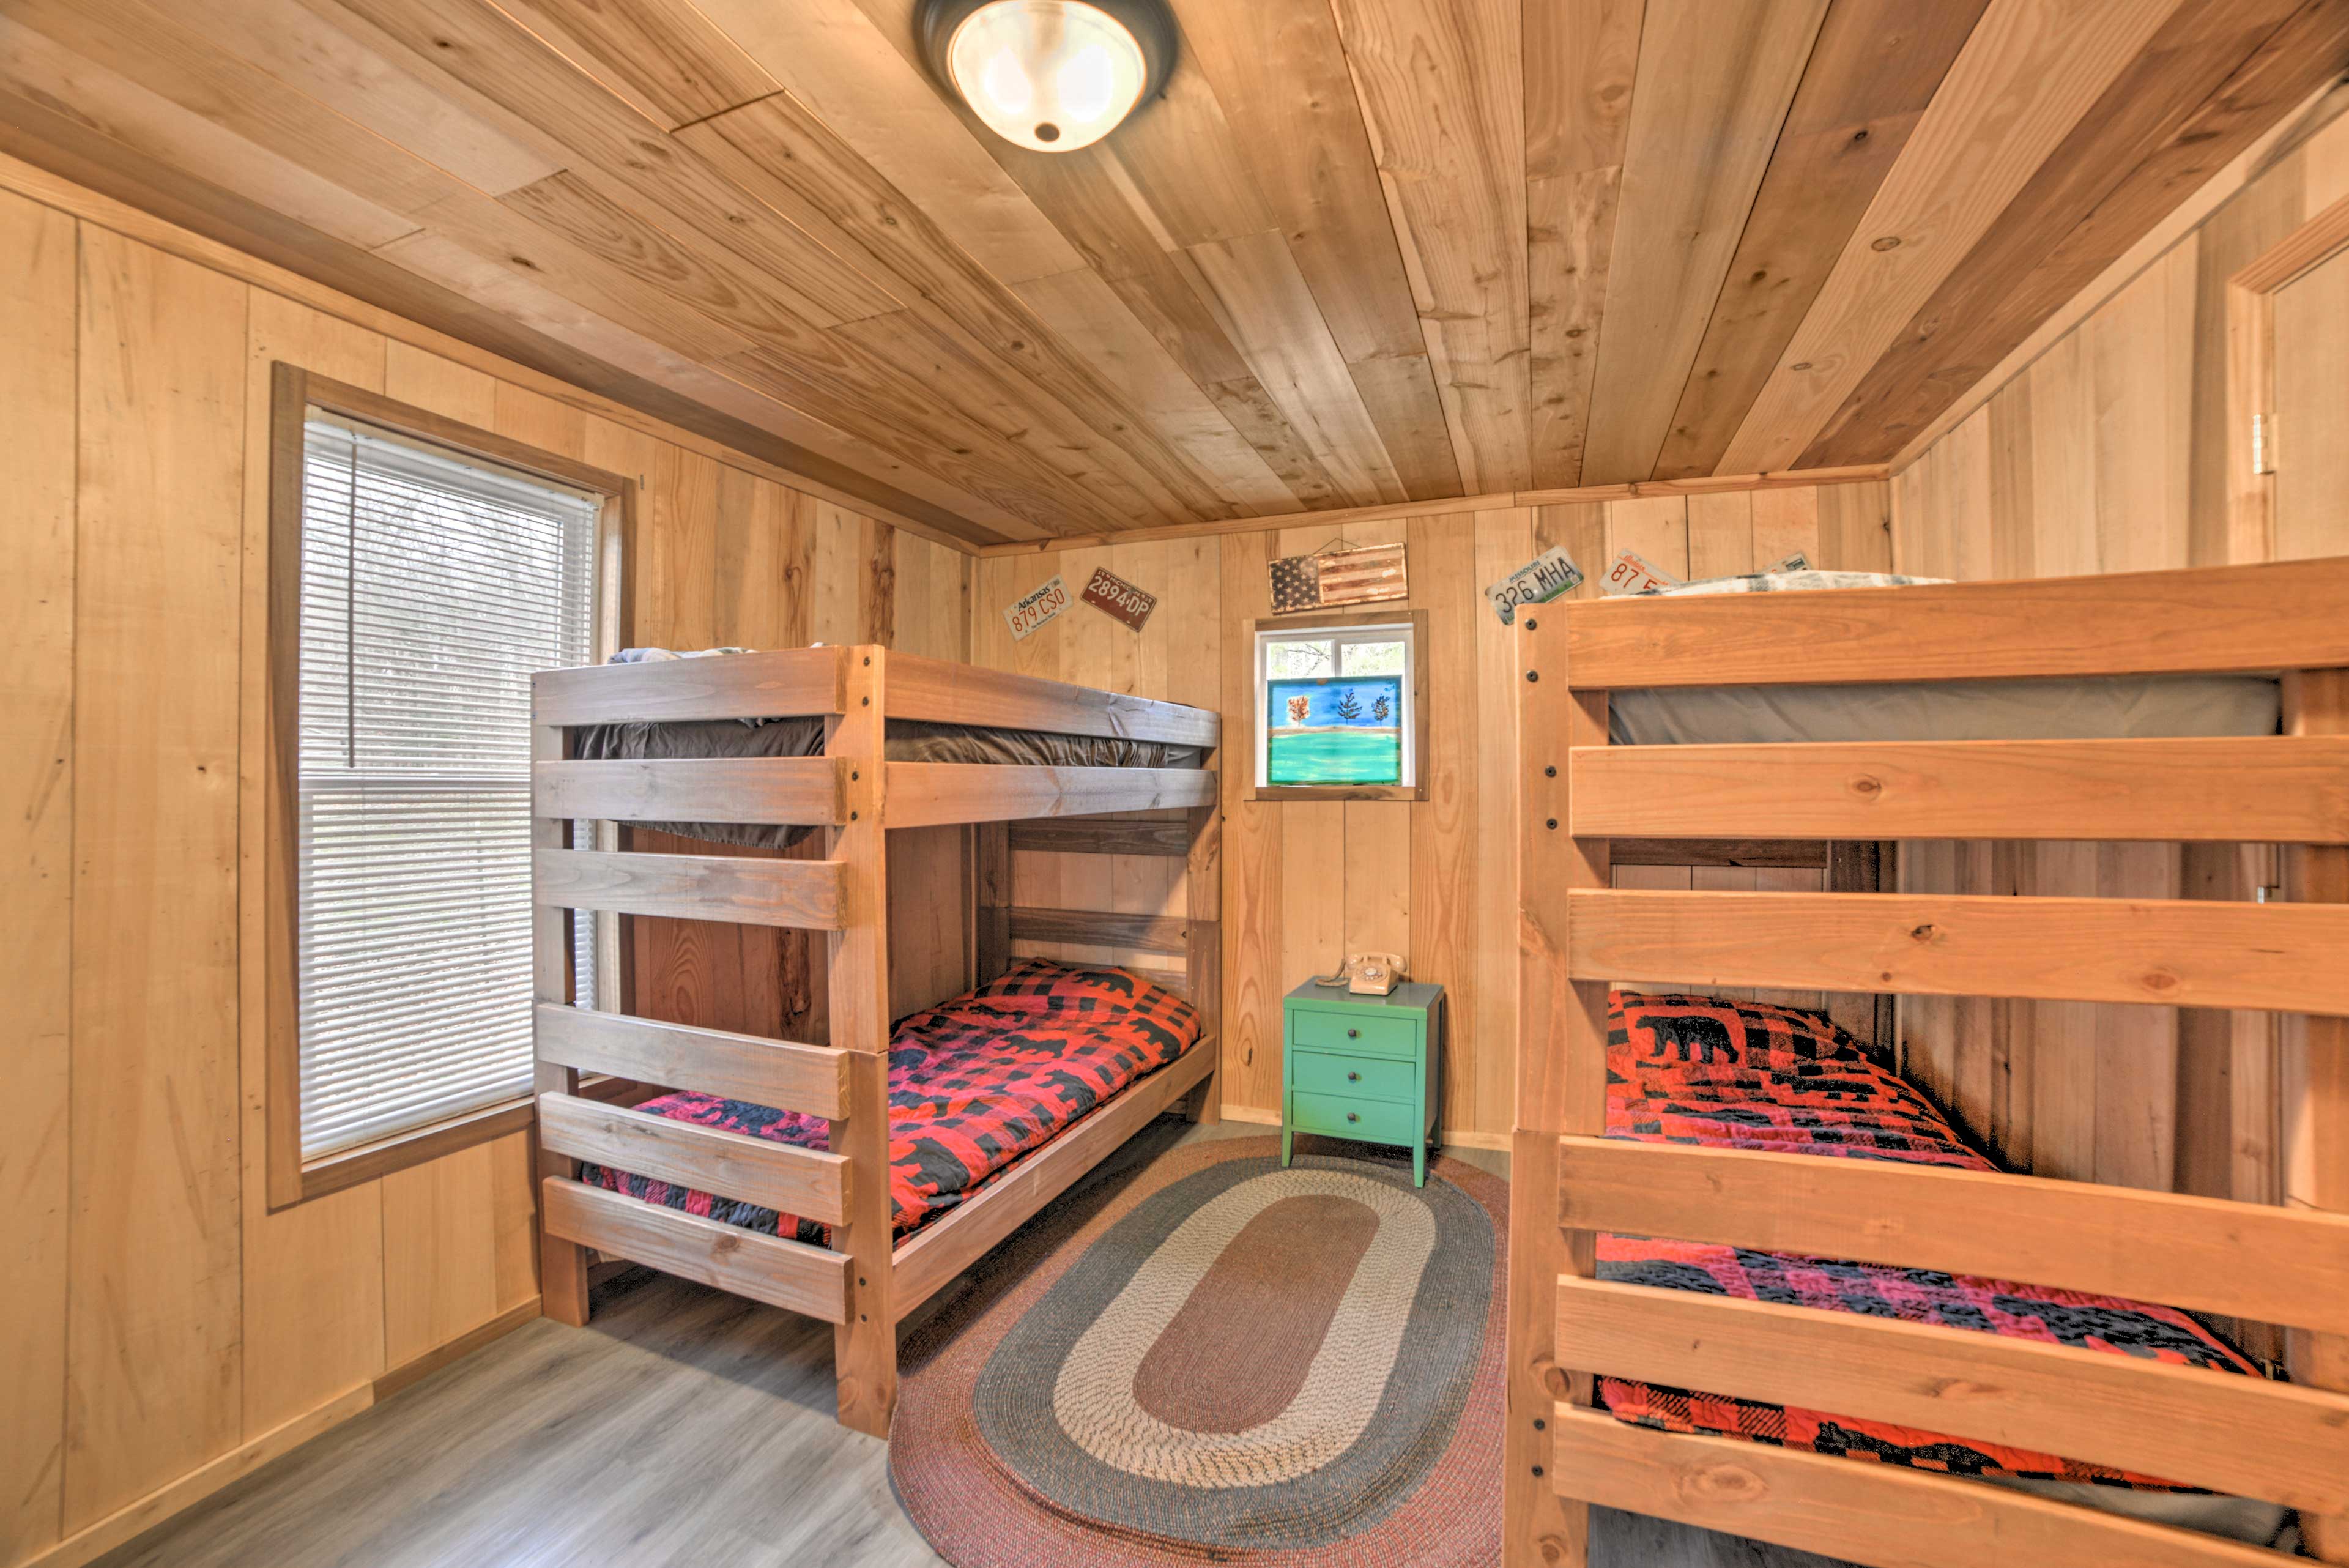 The kids will love the bunk room!